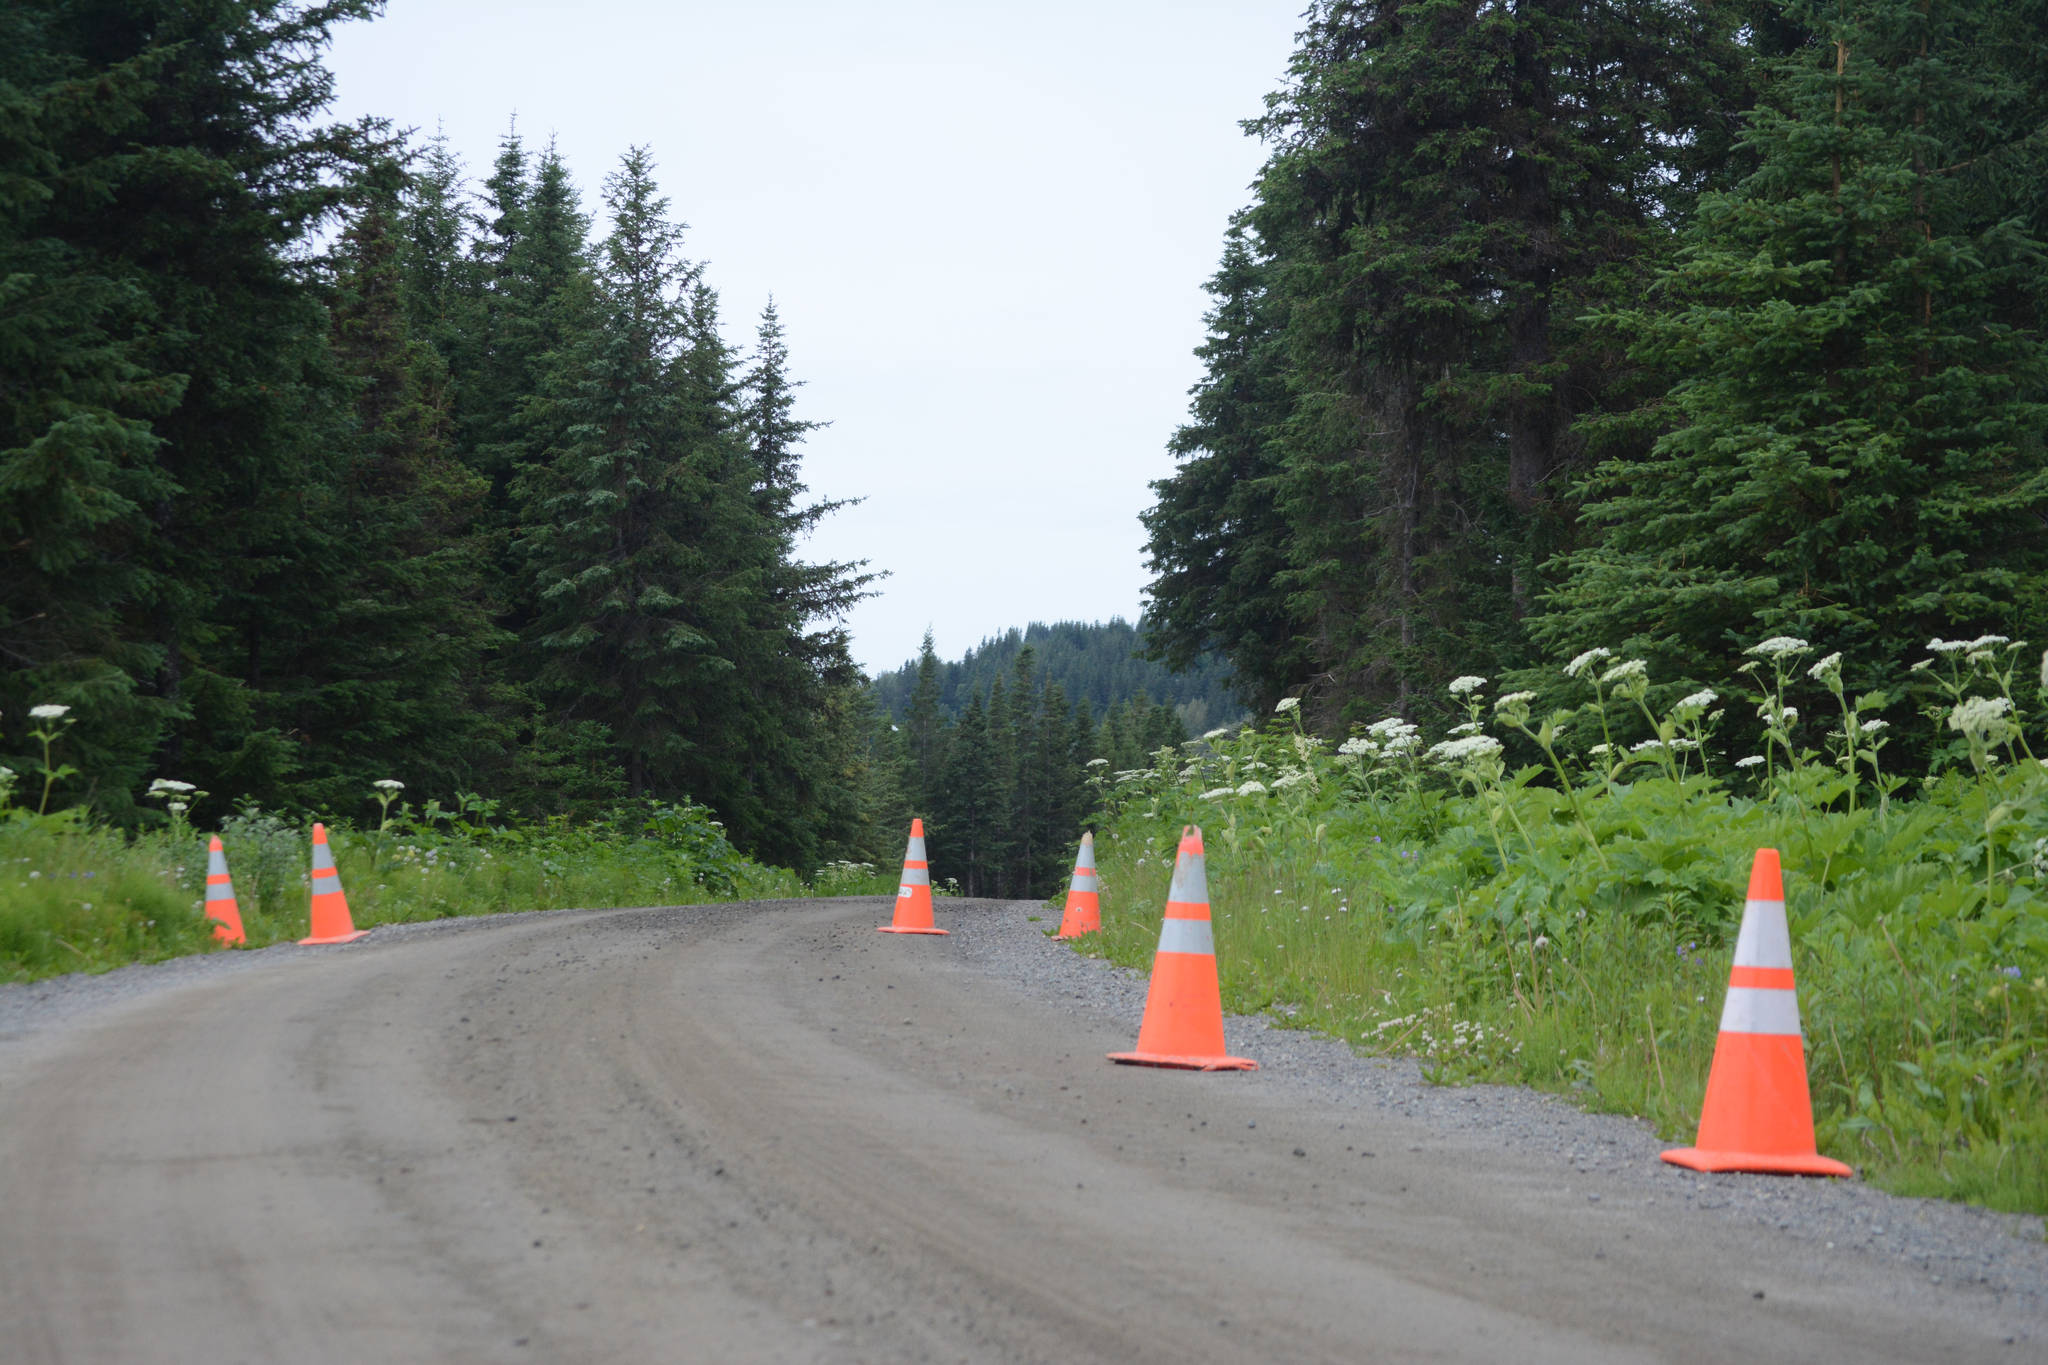 Cones on Dorothy Drive mark the area where neighbors at the end of the rural road plan to vacate the last 2,000 feet and turn it into a private, gated road. After this photo was taken on July 9, 2018, builders put in a circular turn around on the road downhill from East Skyline Drive in Homer, Alaska. (Photo by Michael Armstrong/Homer News)